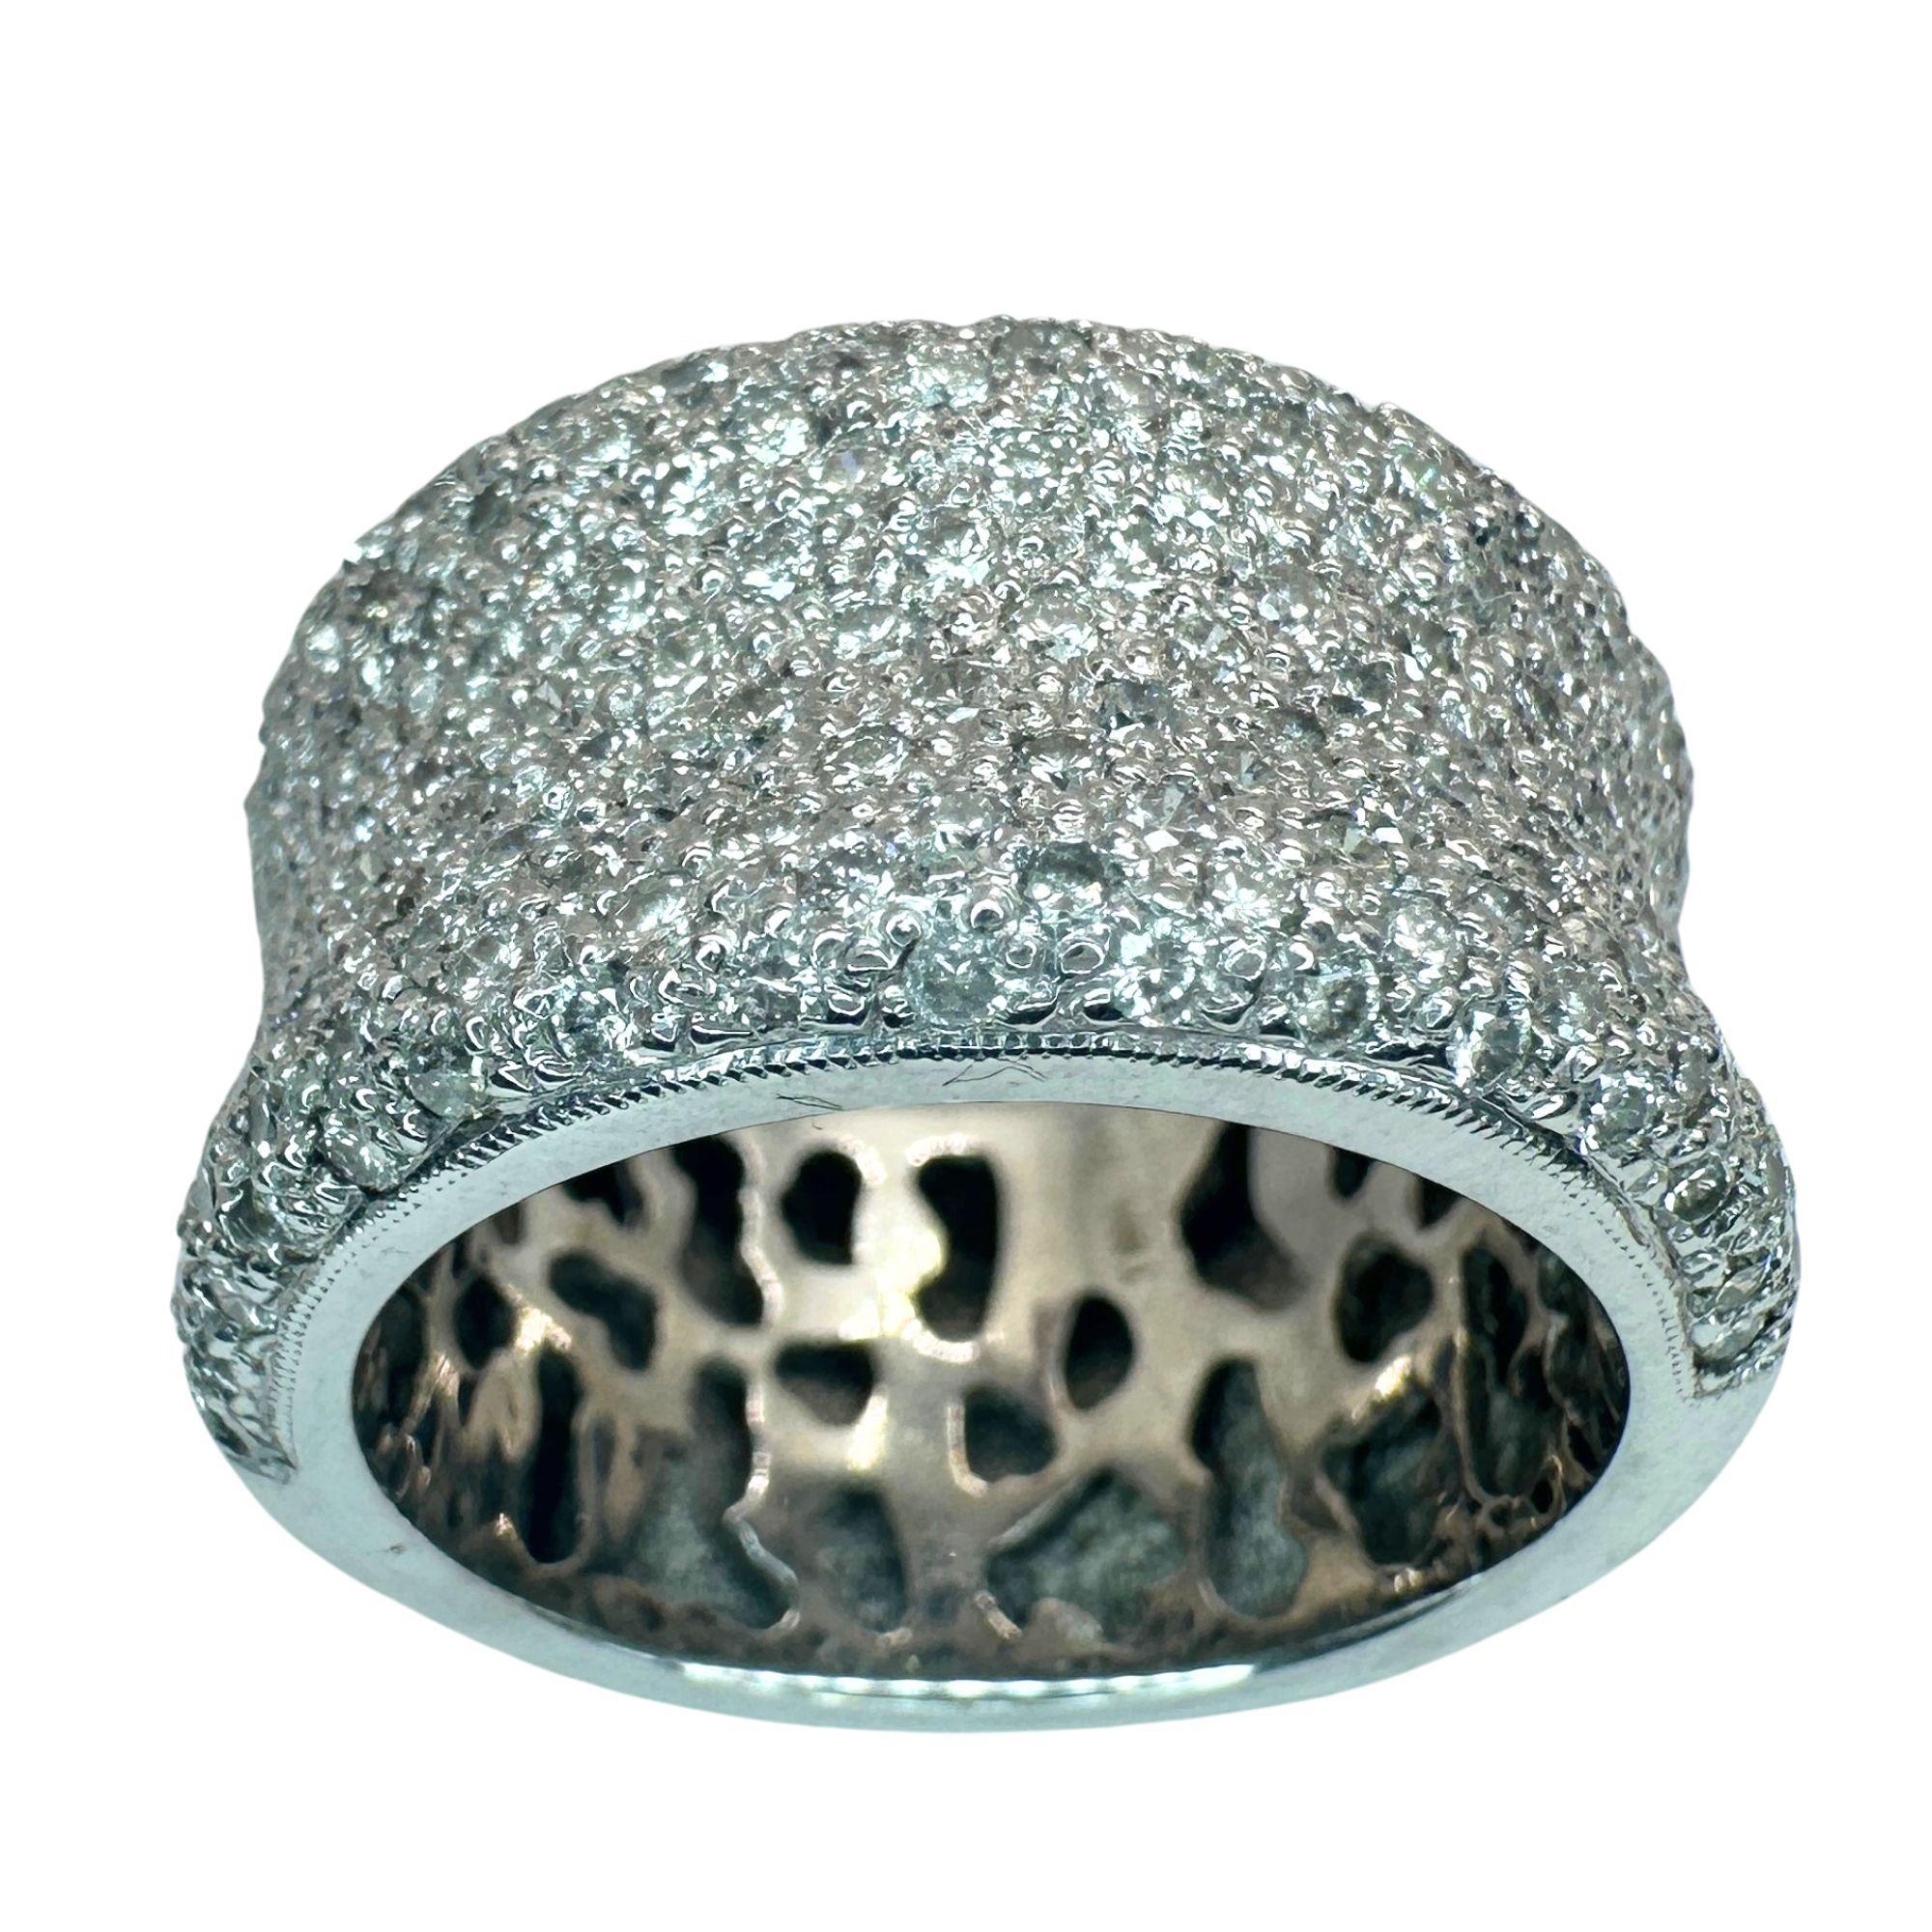 This elegant 18k diamond wide band ring is crafted from 18k white gold and features a total of 2.22 carats of sparkling diamonds. With a ring size of 9 and a width of 13.18mm, this ring is in excellent condition with only minor surface wear. The